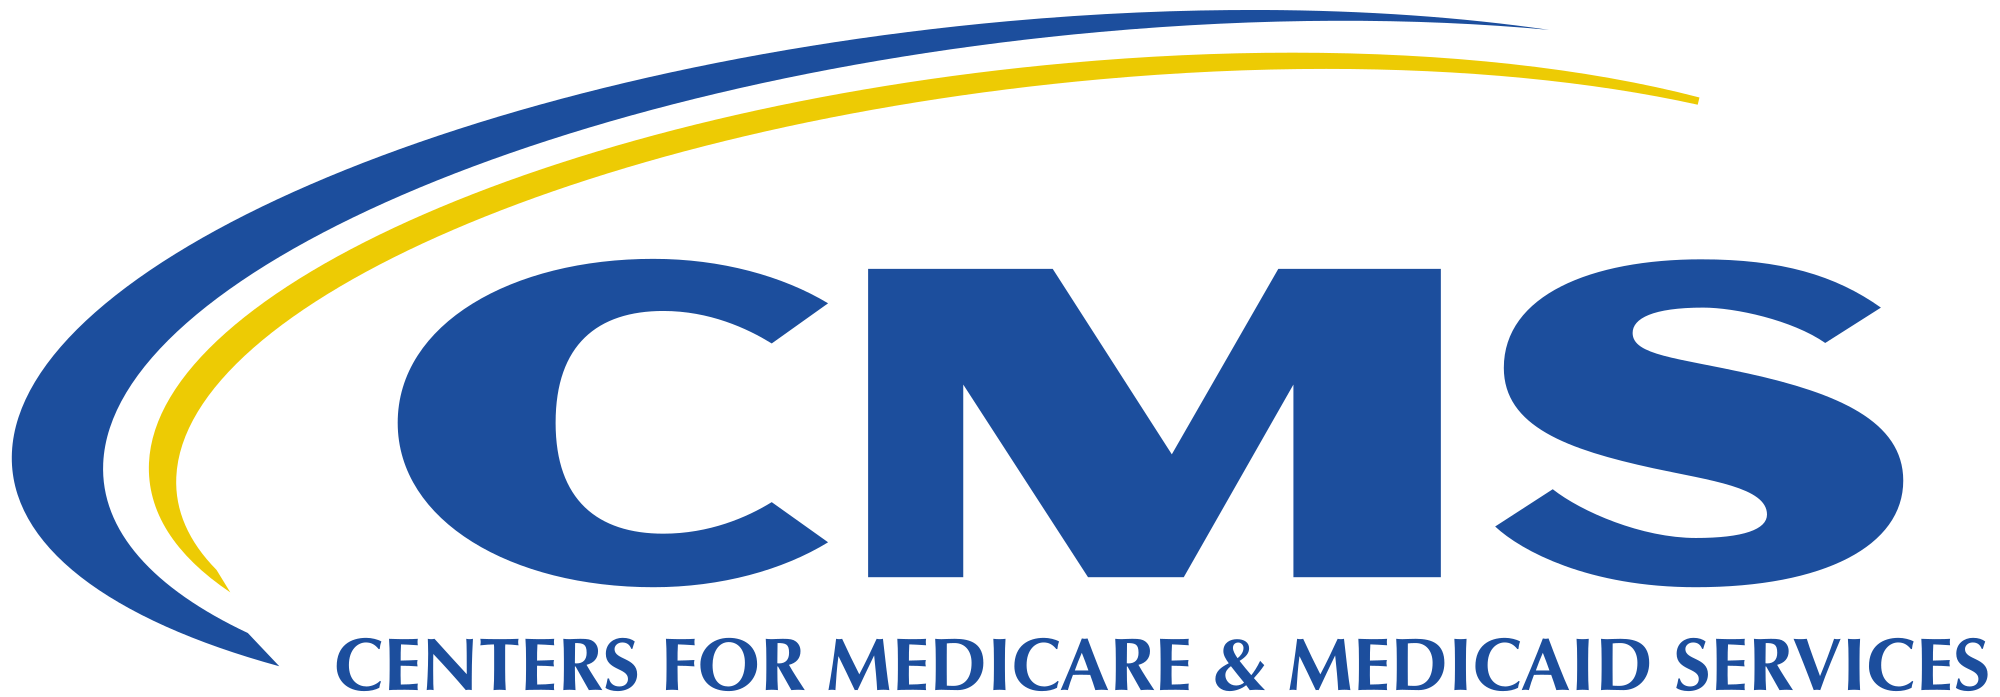 Medicare Logo - File:Centers for Medicare and Medicaid Services logo.svg - Wikimedia ...